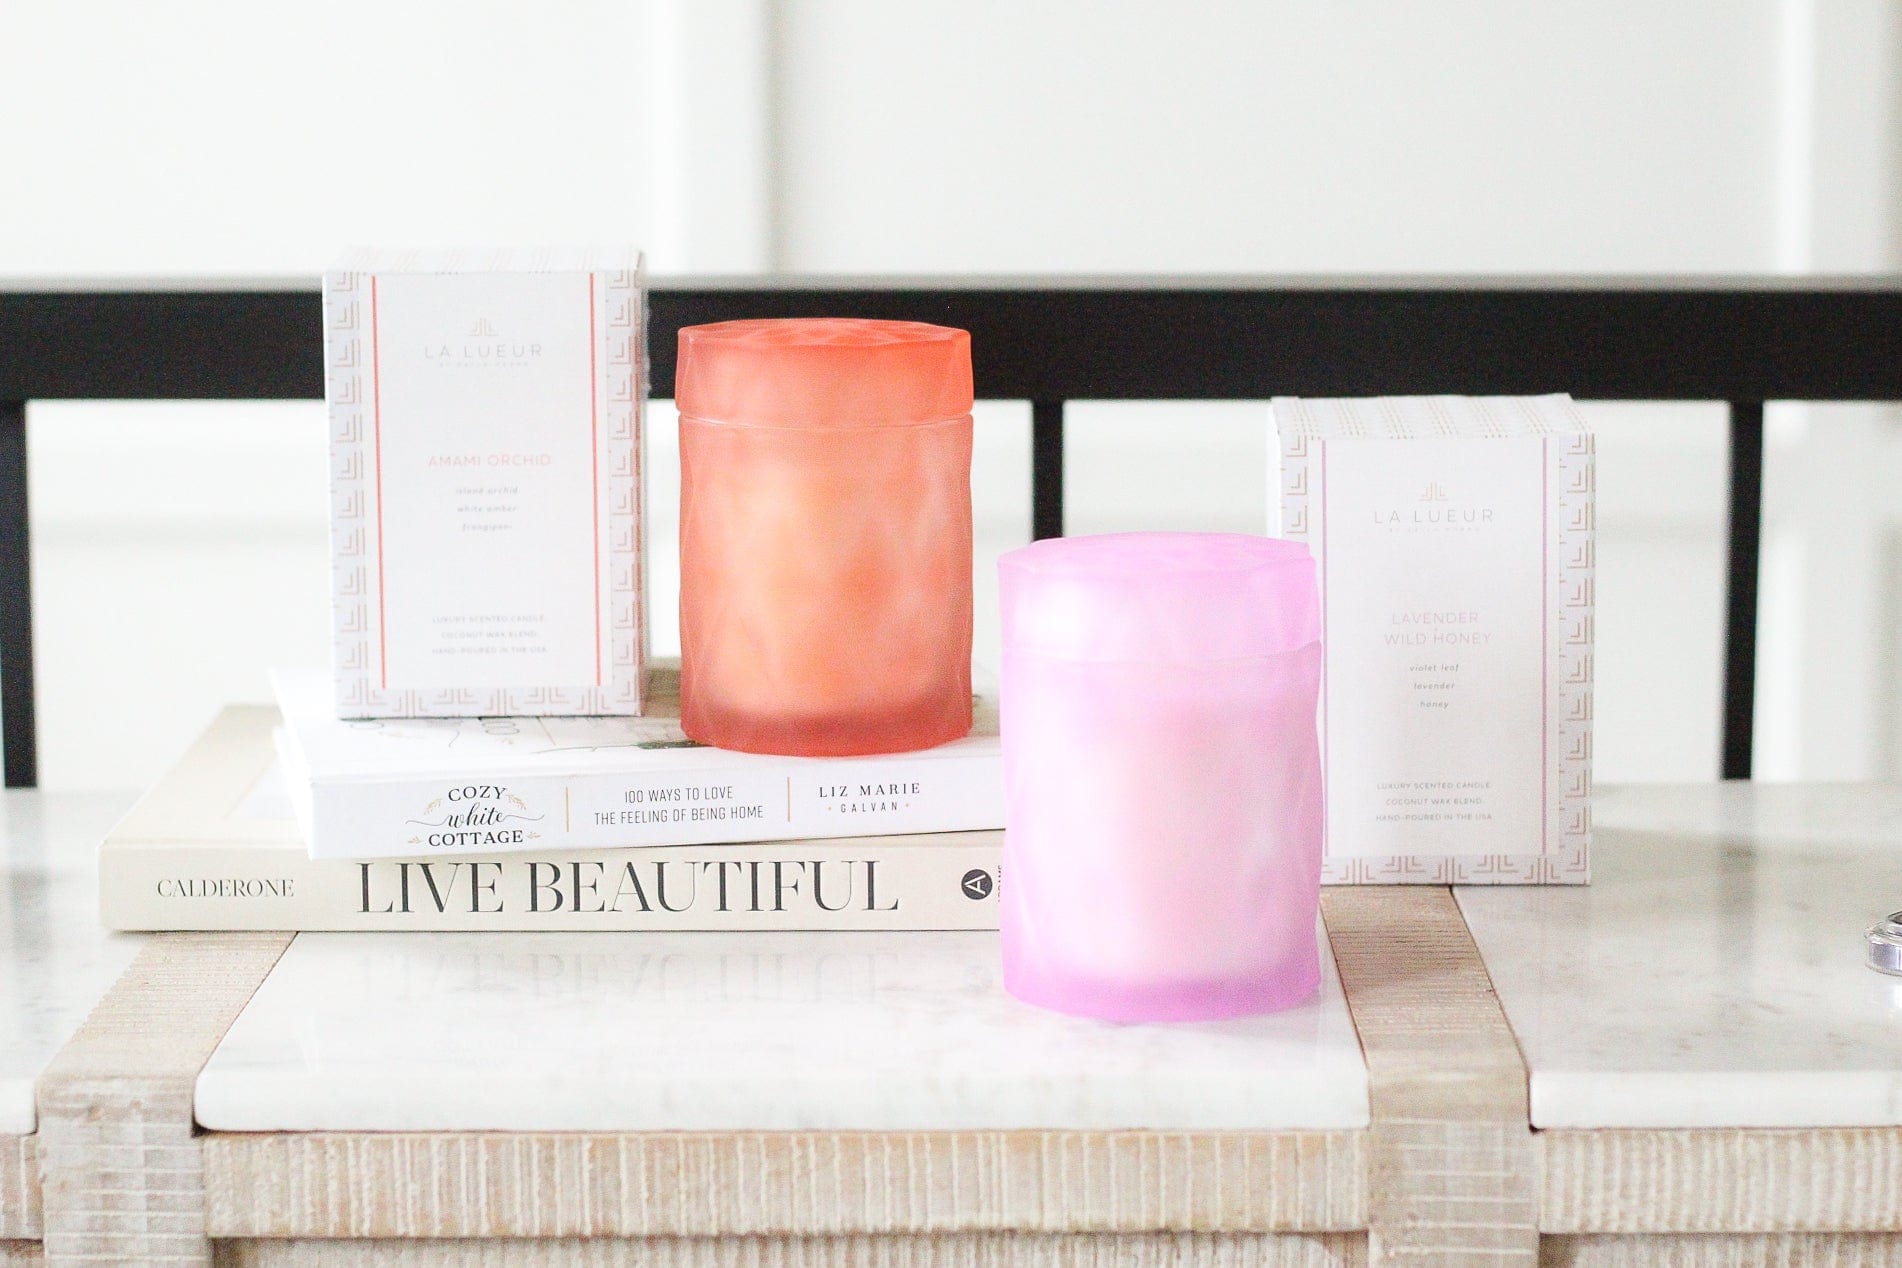 lavender lilac color and coral color glass candle jars with lids next to candle packaging on coffee table books